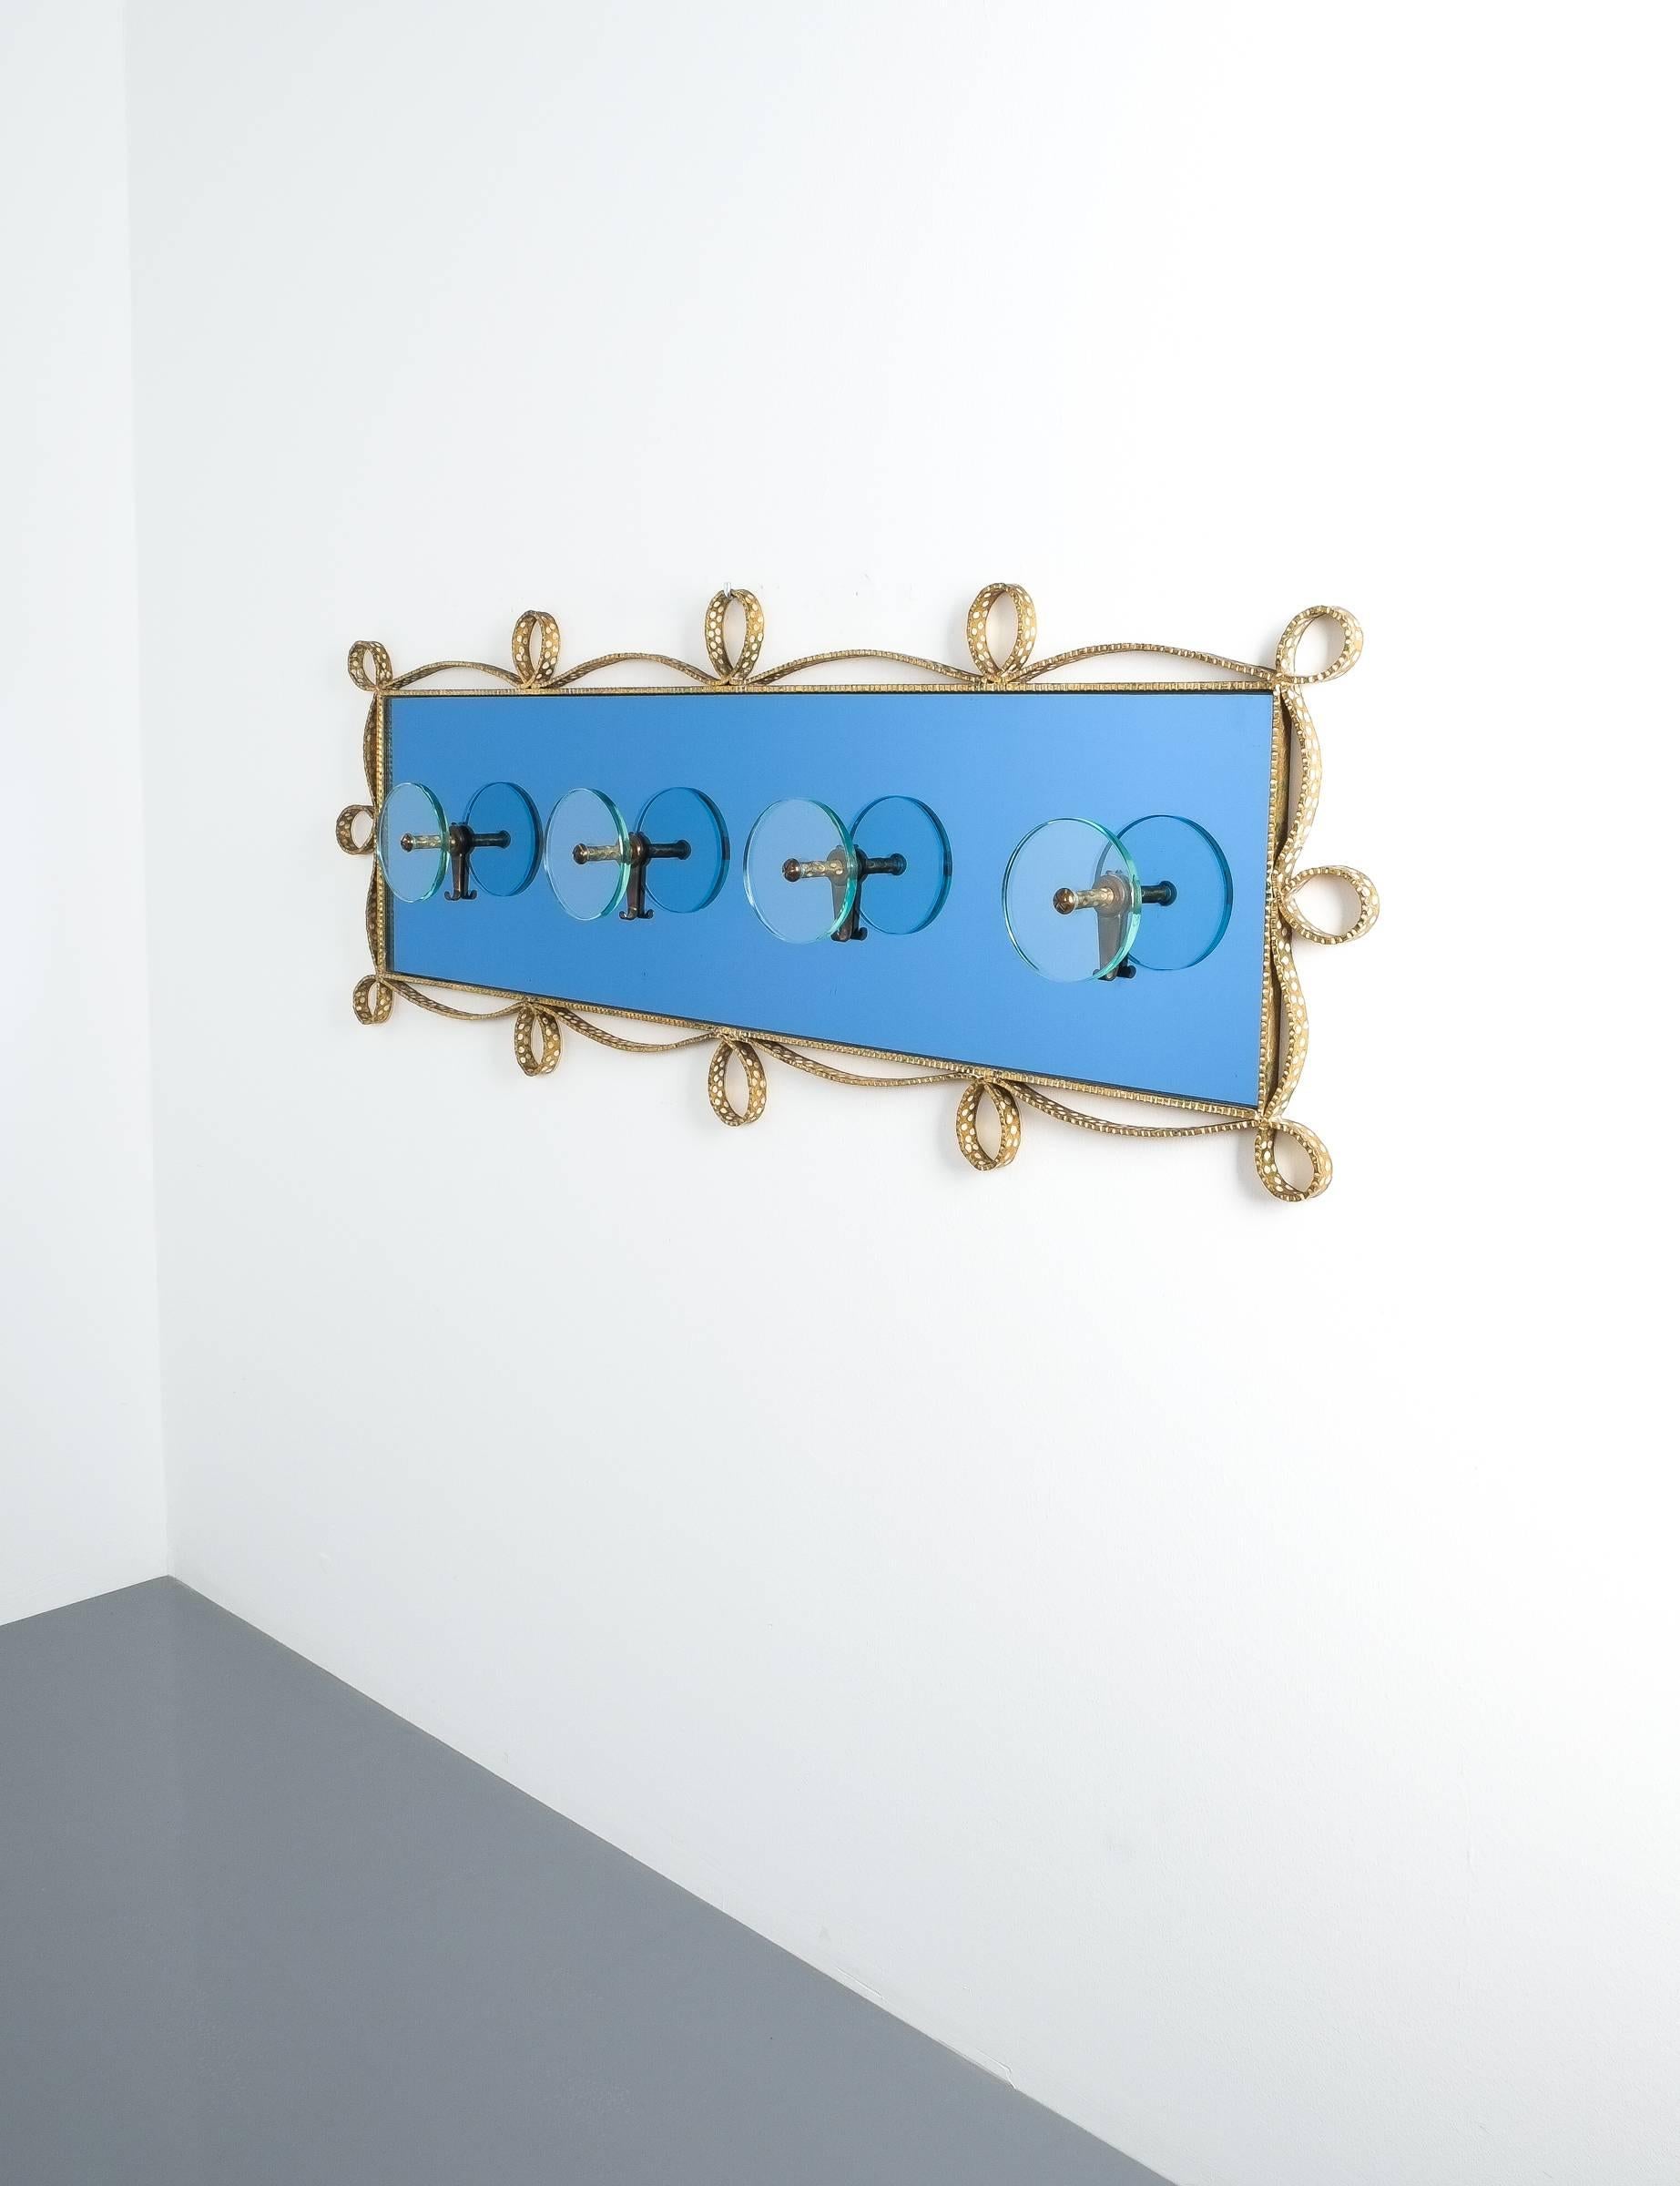 Rare coat rack from blue glass and iron from Pier Luigi Colli 

Coatrack wall wardrobe iron blue glass mirror, Italy, 1955 (for crystal Art Torino) Beautiful coatrack made from smooth glass pieces in rare mirrored blue and clear glass. Typical